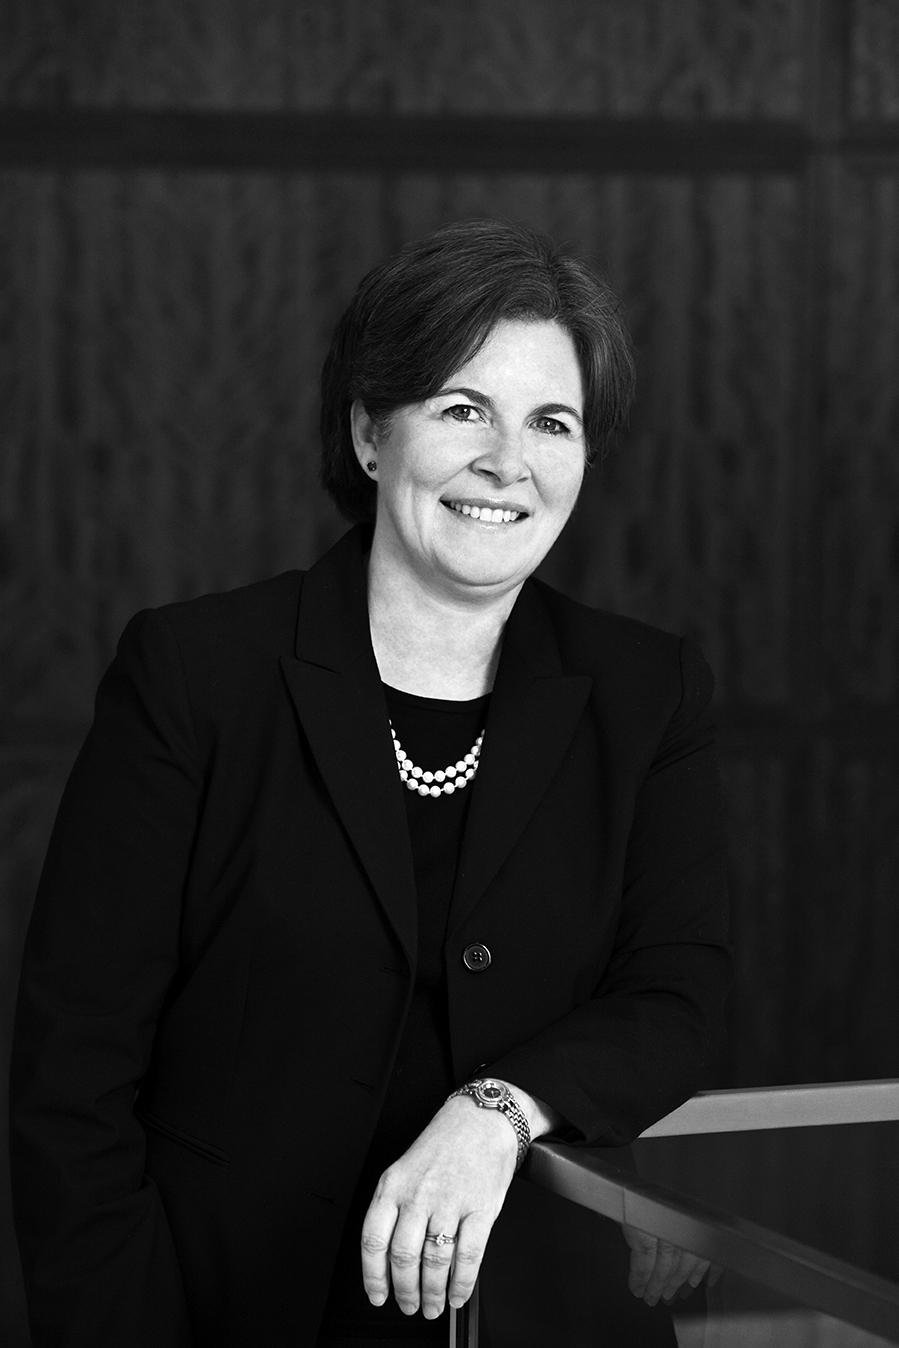 Image Description. Black and white photograph of a Caucasian woman with short brown hair standing in an office, smiling.